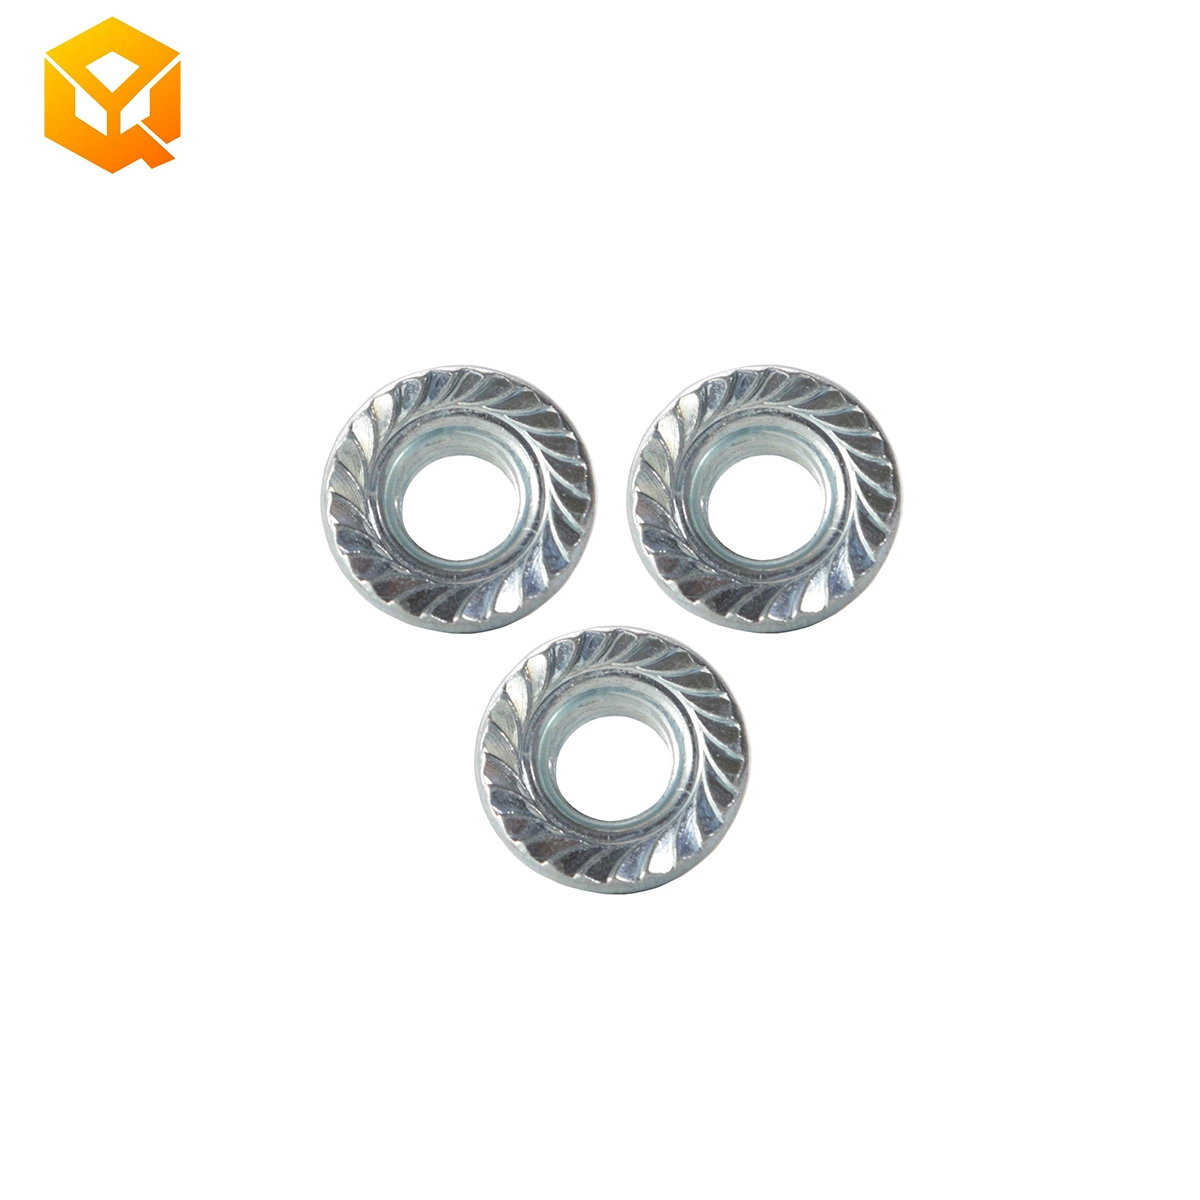 DIN6923 Low Price High Quality Carbon Steel Hexagon Flange Nut Galvanized 4.8 8.8 Hex Flange Nuts